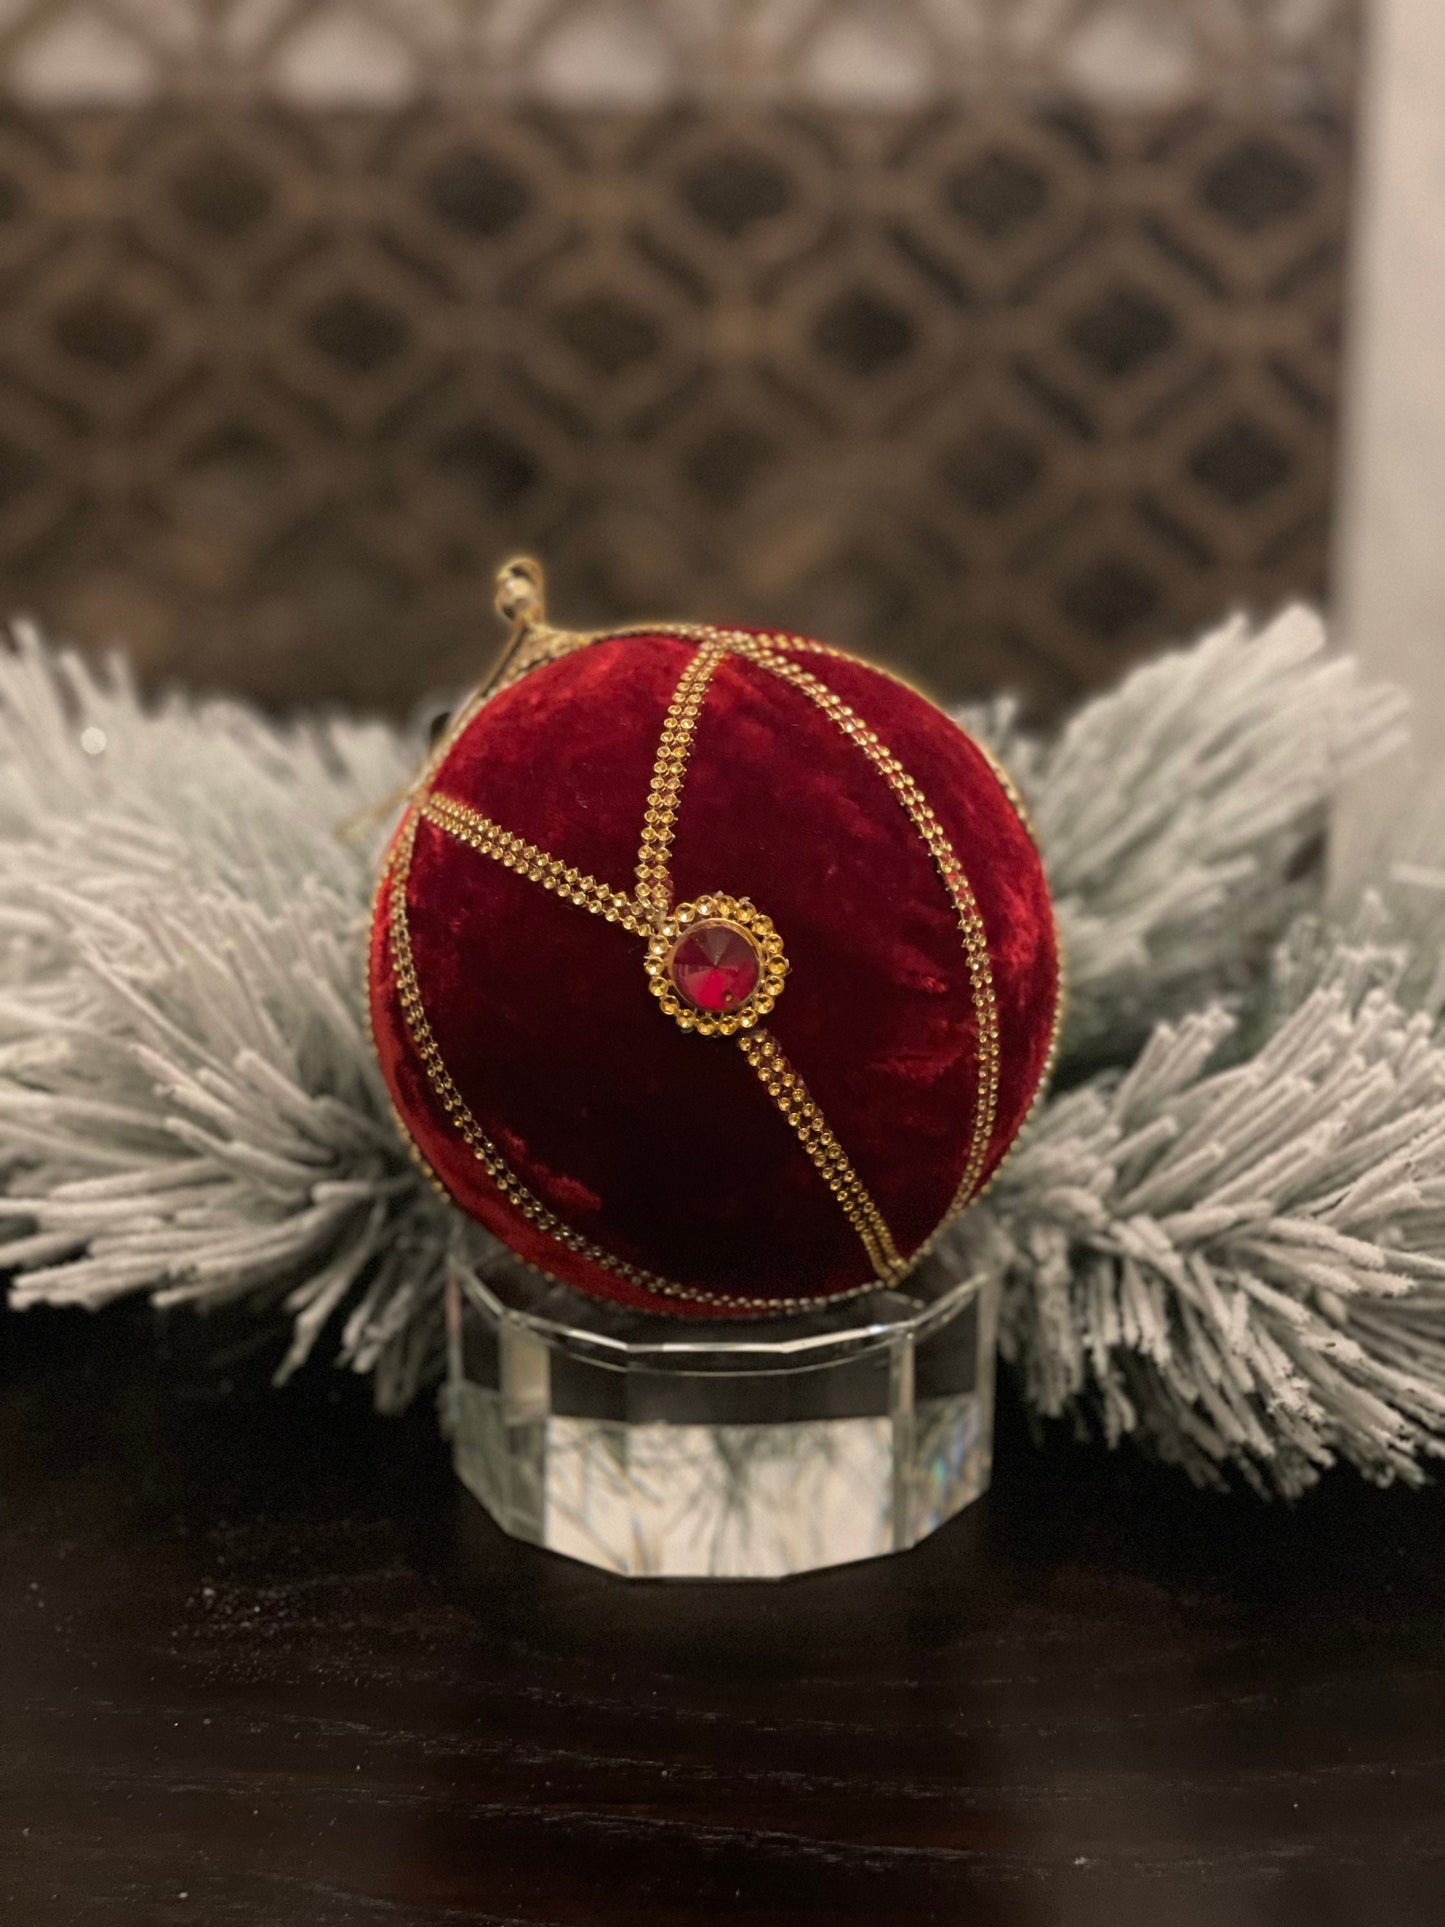 6” Jeweled velvet ball ornament red and gold.